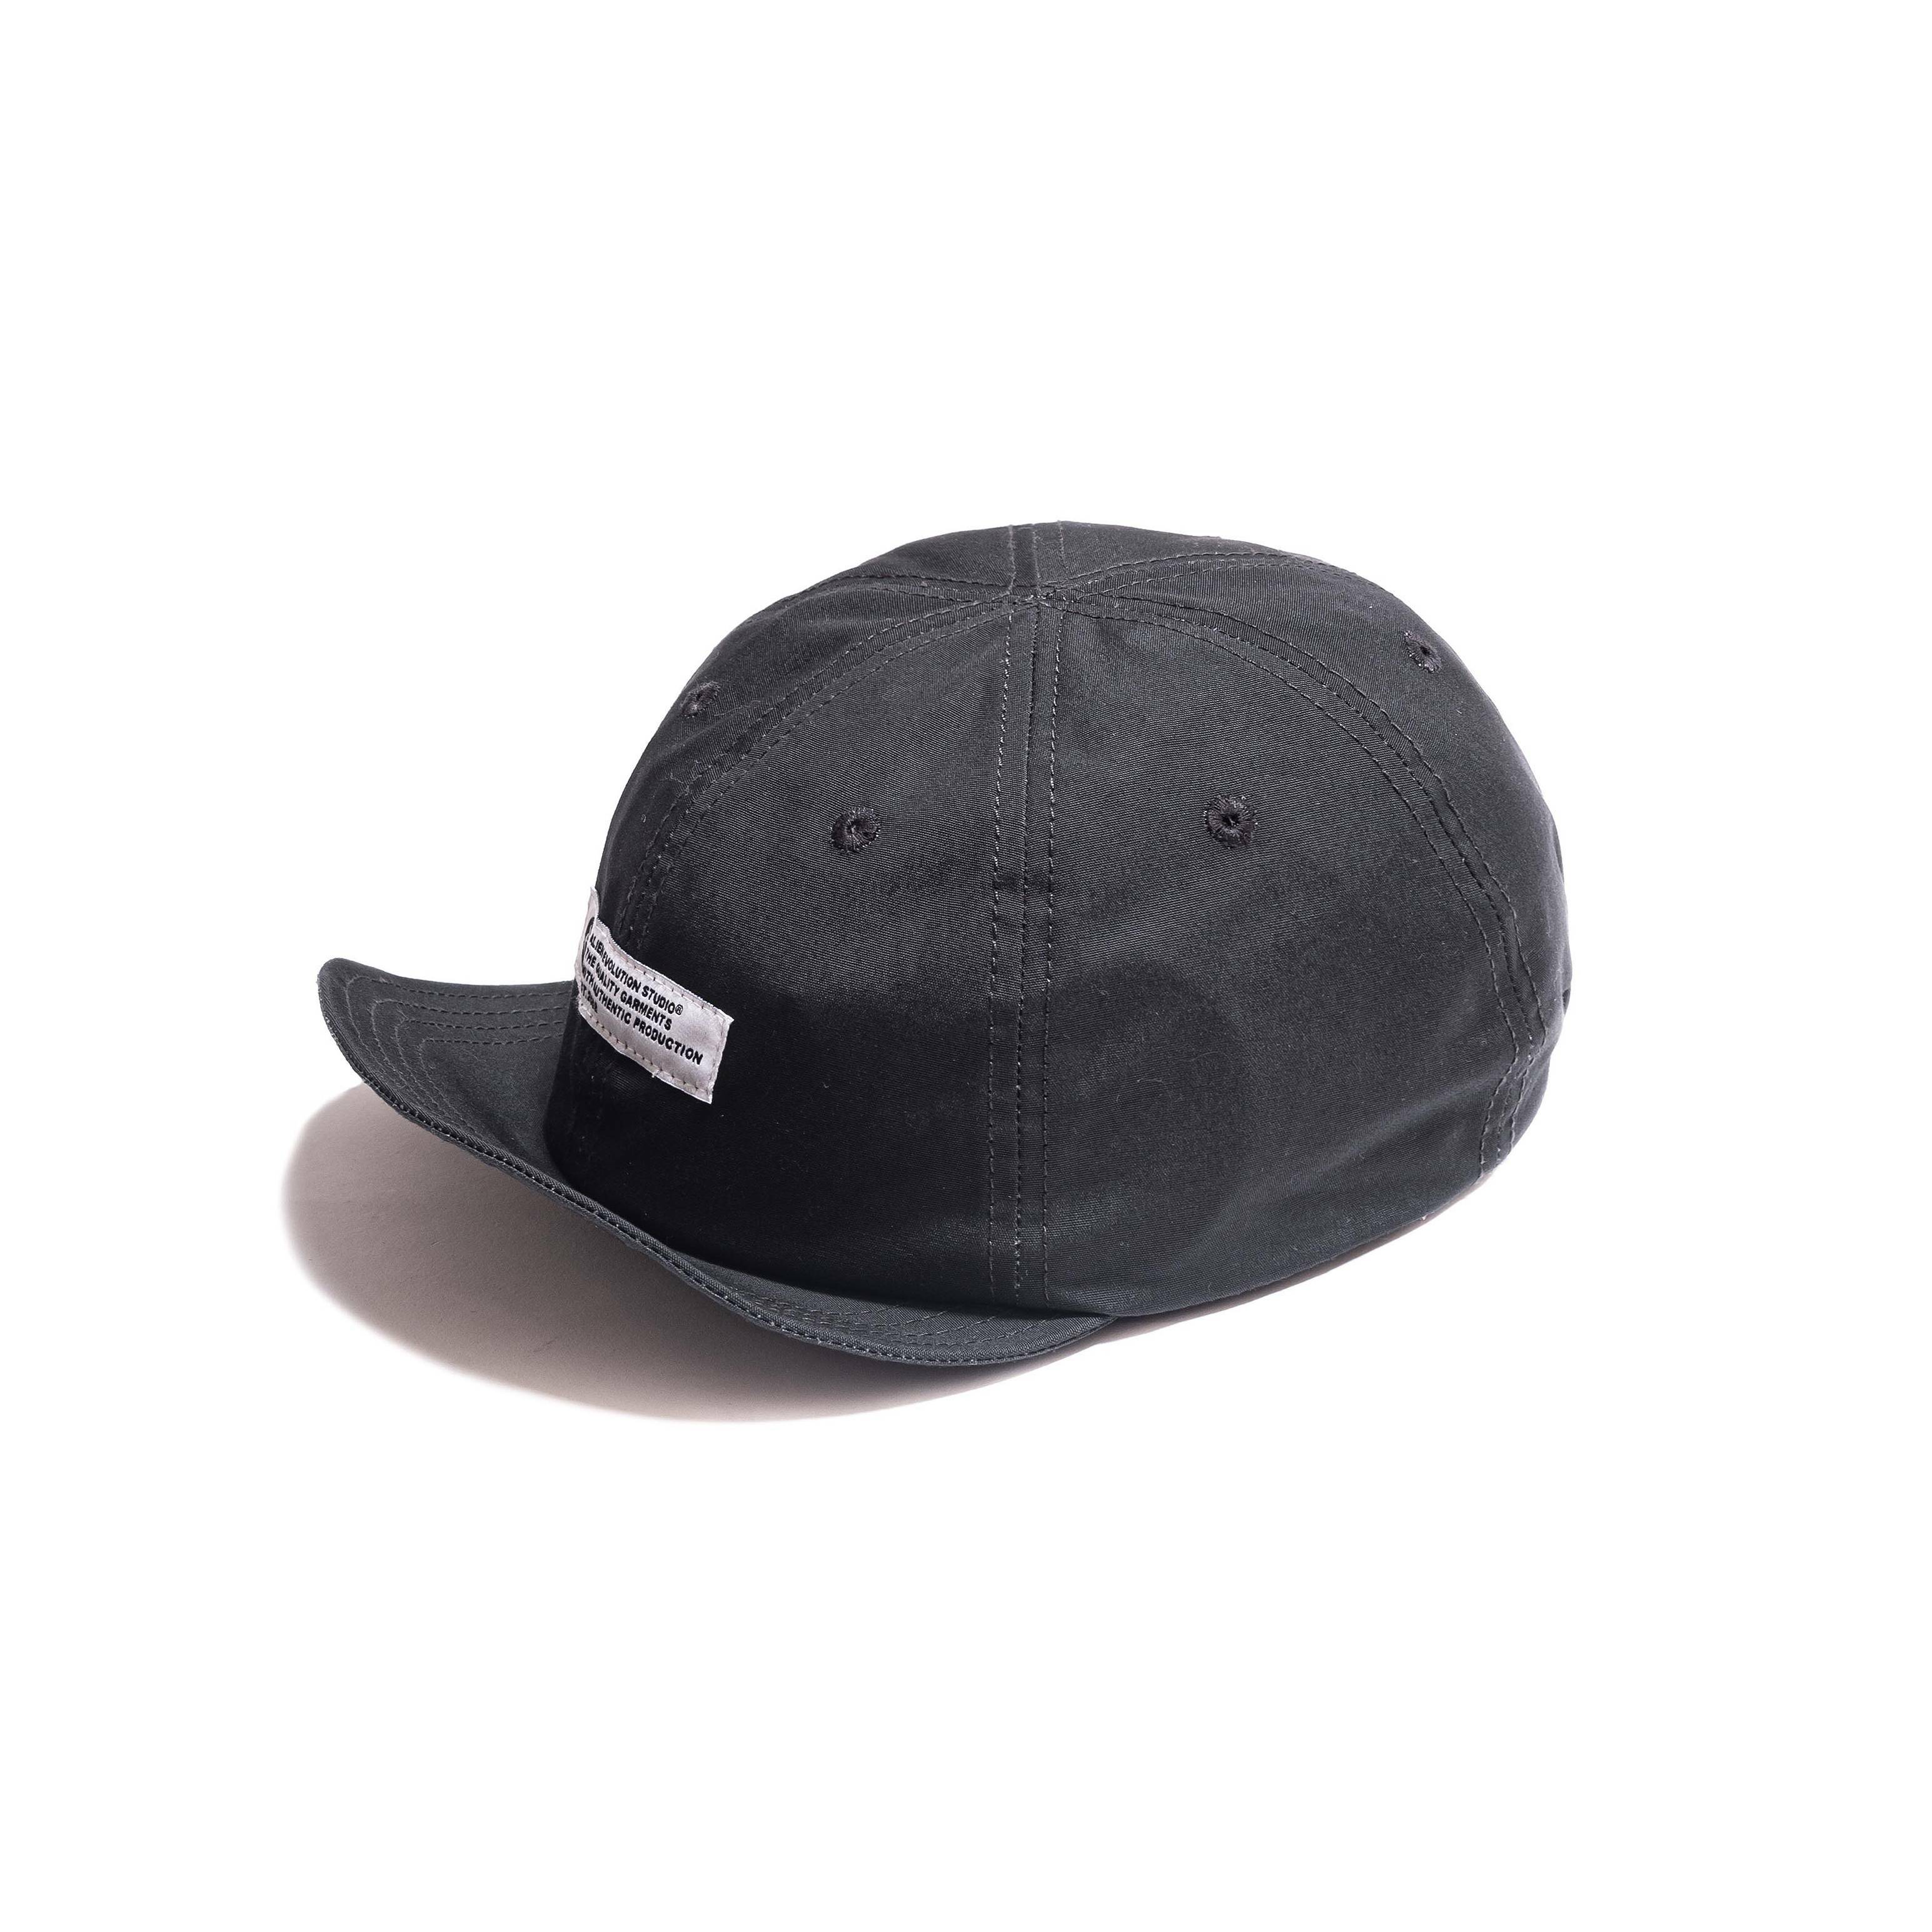 PERSEVERE X AES - KEEP IT UP - STYLE 06 CYCLING CAP